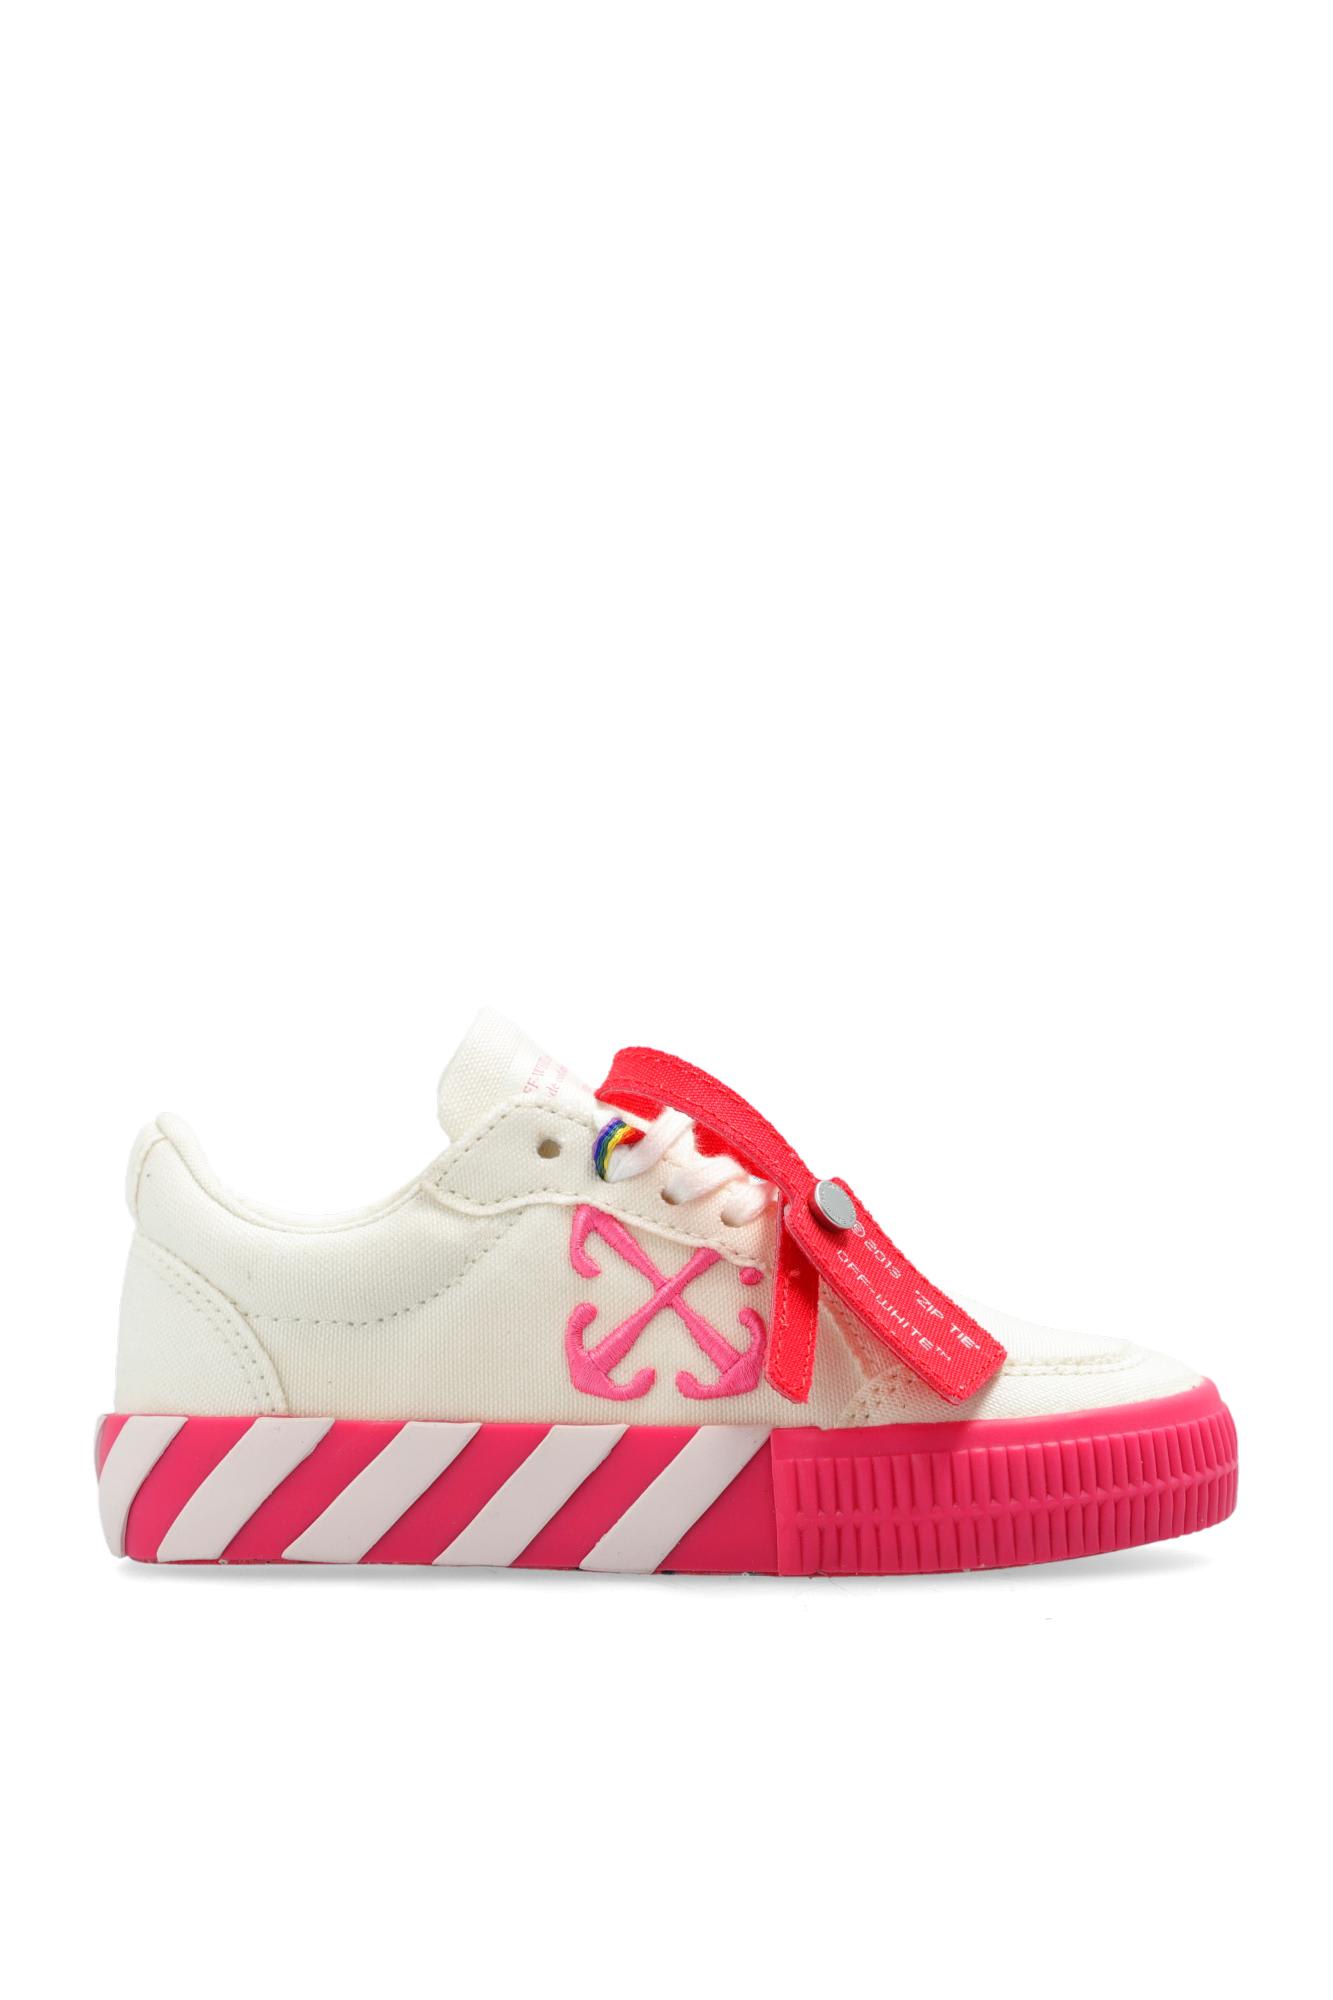 OFF-WHITE OFF-WHITE KIDS PLATFORM SNEAKERS